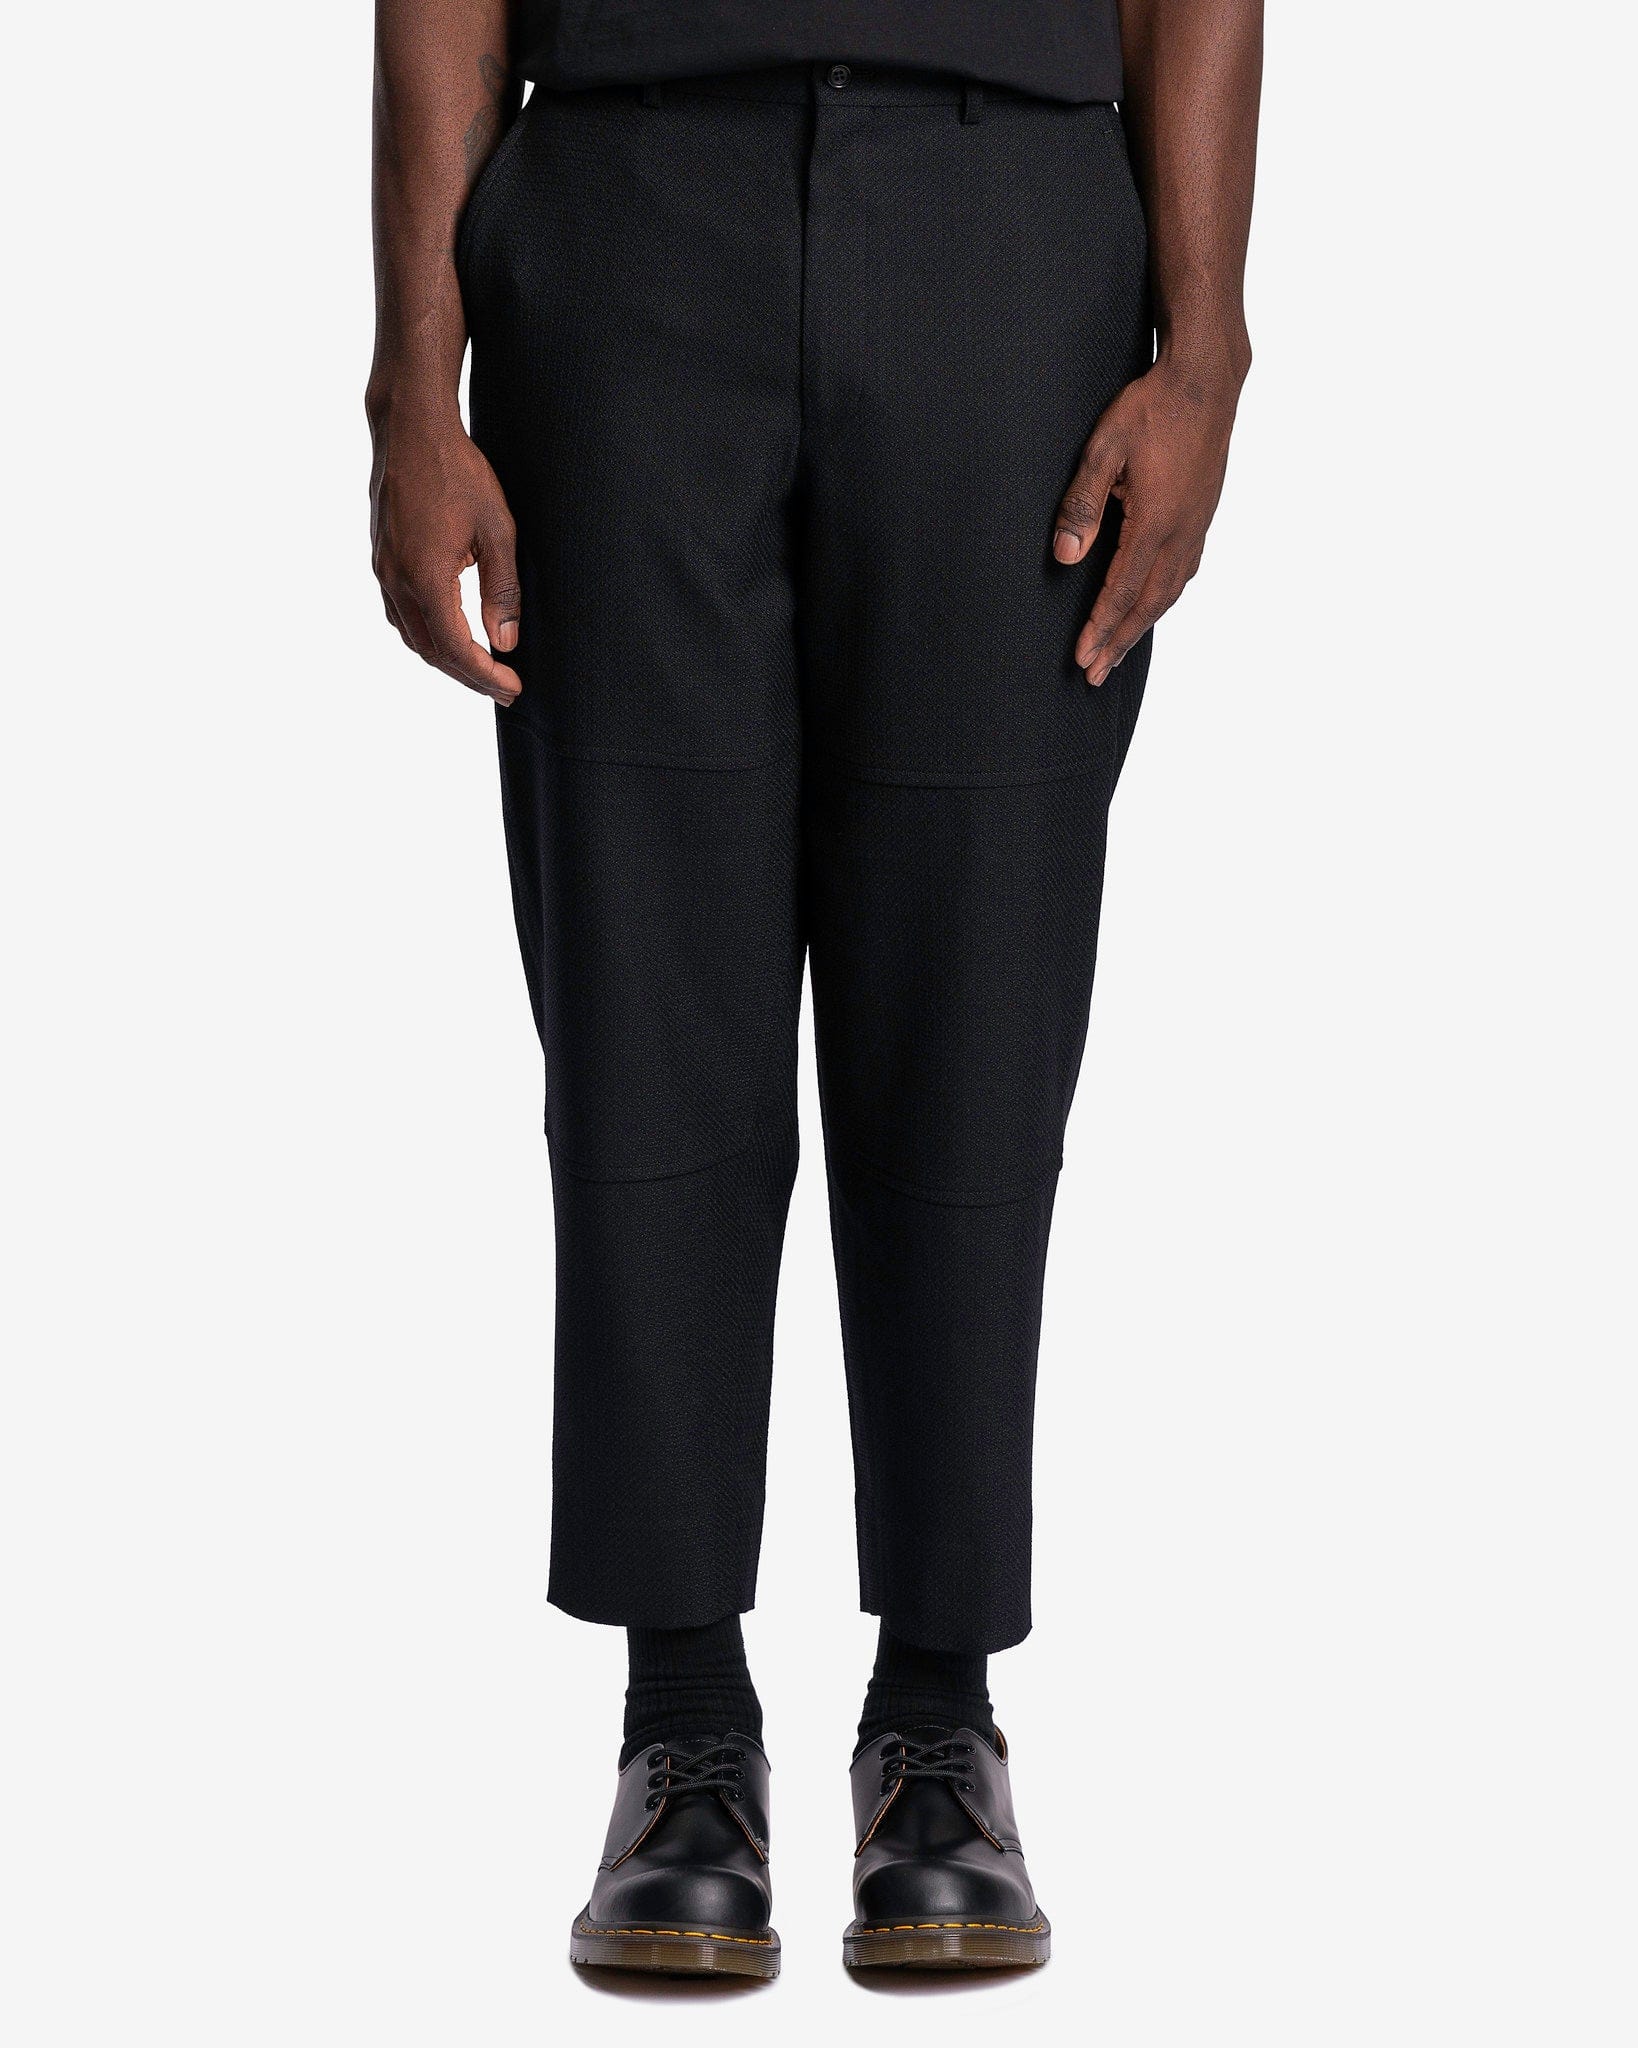 Comme des Garcons Homme Deux Men's Pants High Waisted Tapered Trousers in Black